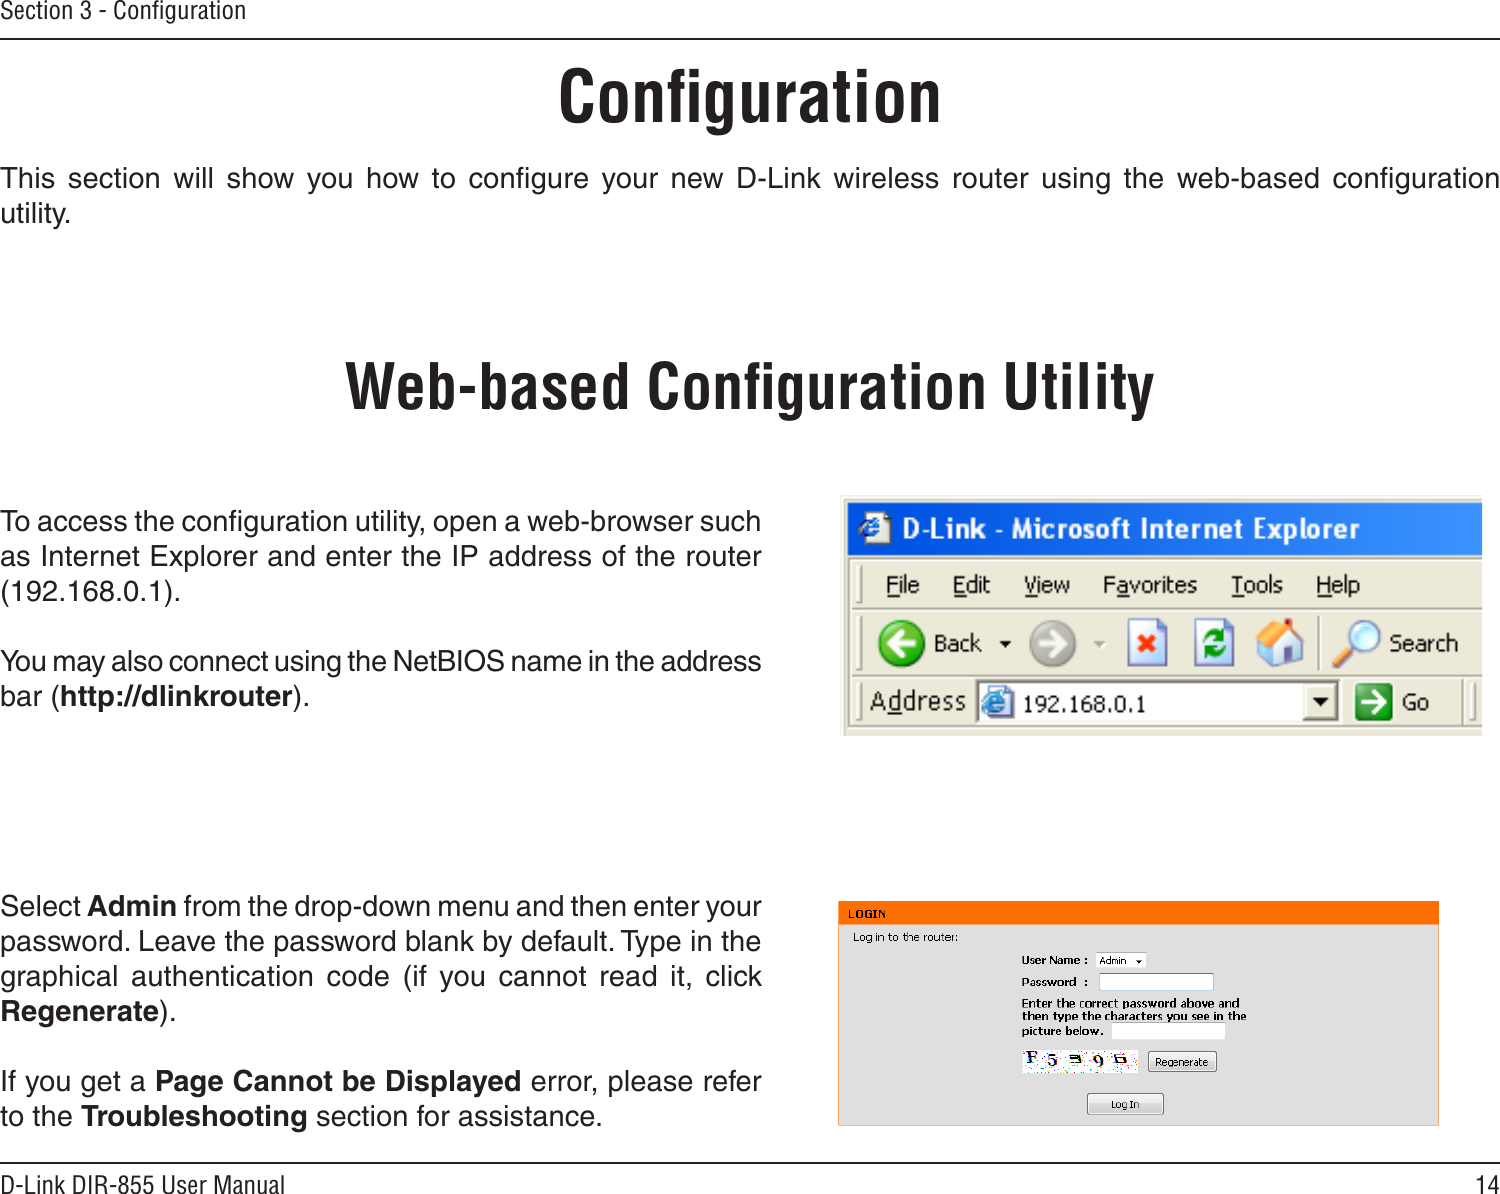 14D-Link DIR-855 User ManualSection 3 - ConﬁgurationConﬁgurationThis  section  will  show  you  how  to  conﬁgure  your  new  D-Link  wireless  router  using  the  web-based  conﬁguration utility.Web-based Conﬁguration UtilityTo access the conﬁguration utility, open a web-browser such as Internet Explorer and enter the IP address of the router (192.168.0.1).You may also connect using the NetBIOS name in the address bar (http://dlinkrouter).Select Admin from the drop-down menu and then enter your password. Leave the password blank by default. Type in the graphical  authentication  code  (if  you  cannot  read  it,  click Regenerate).If you get a Page Cannot be Displayed error, please refer to the Troubleshooting section for assistance.